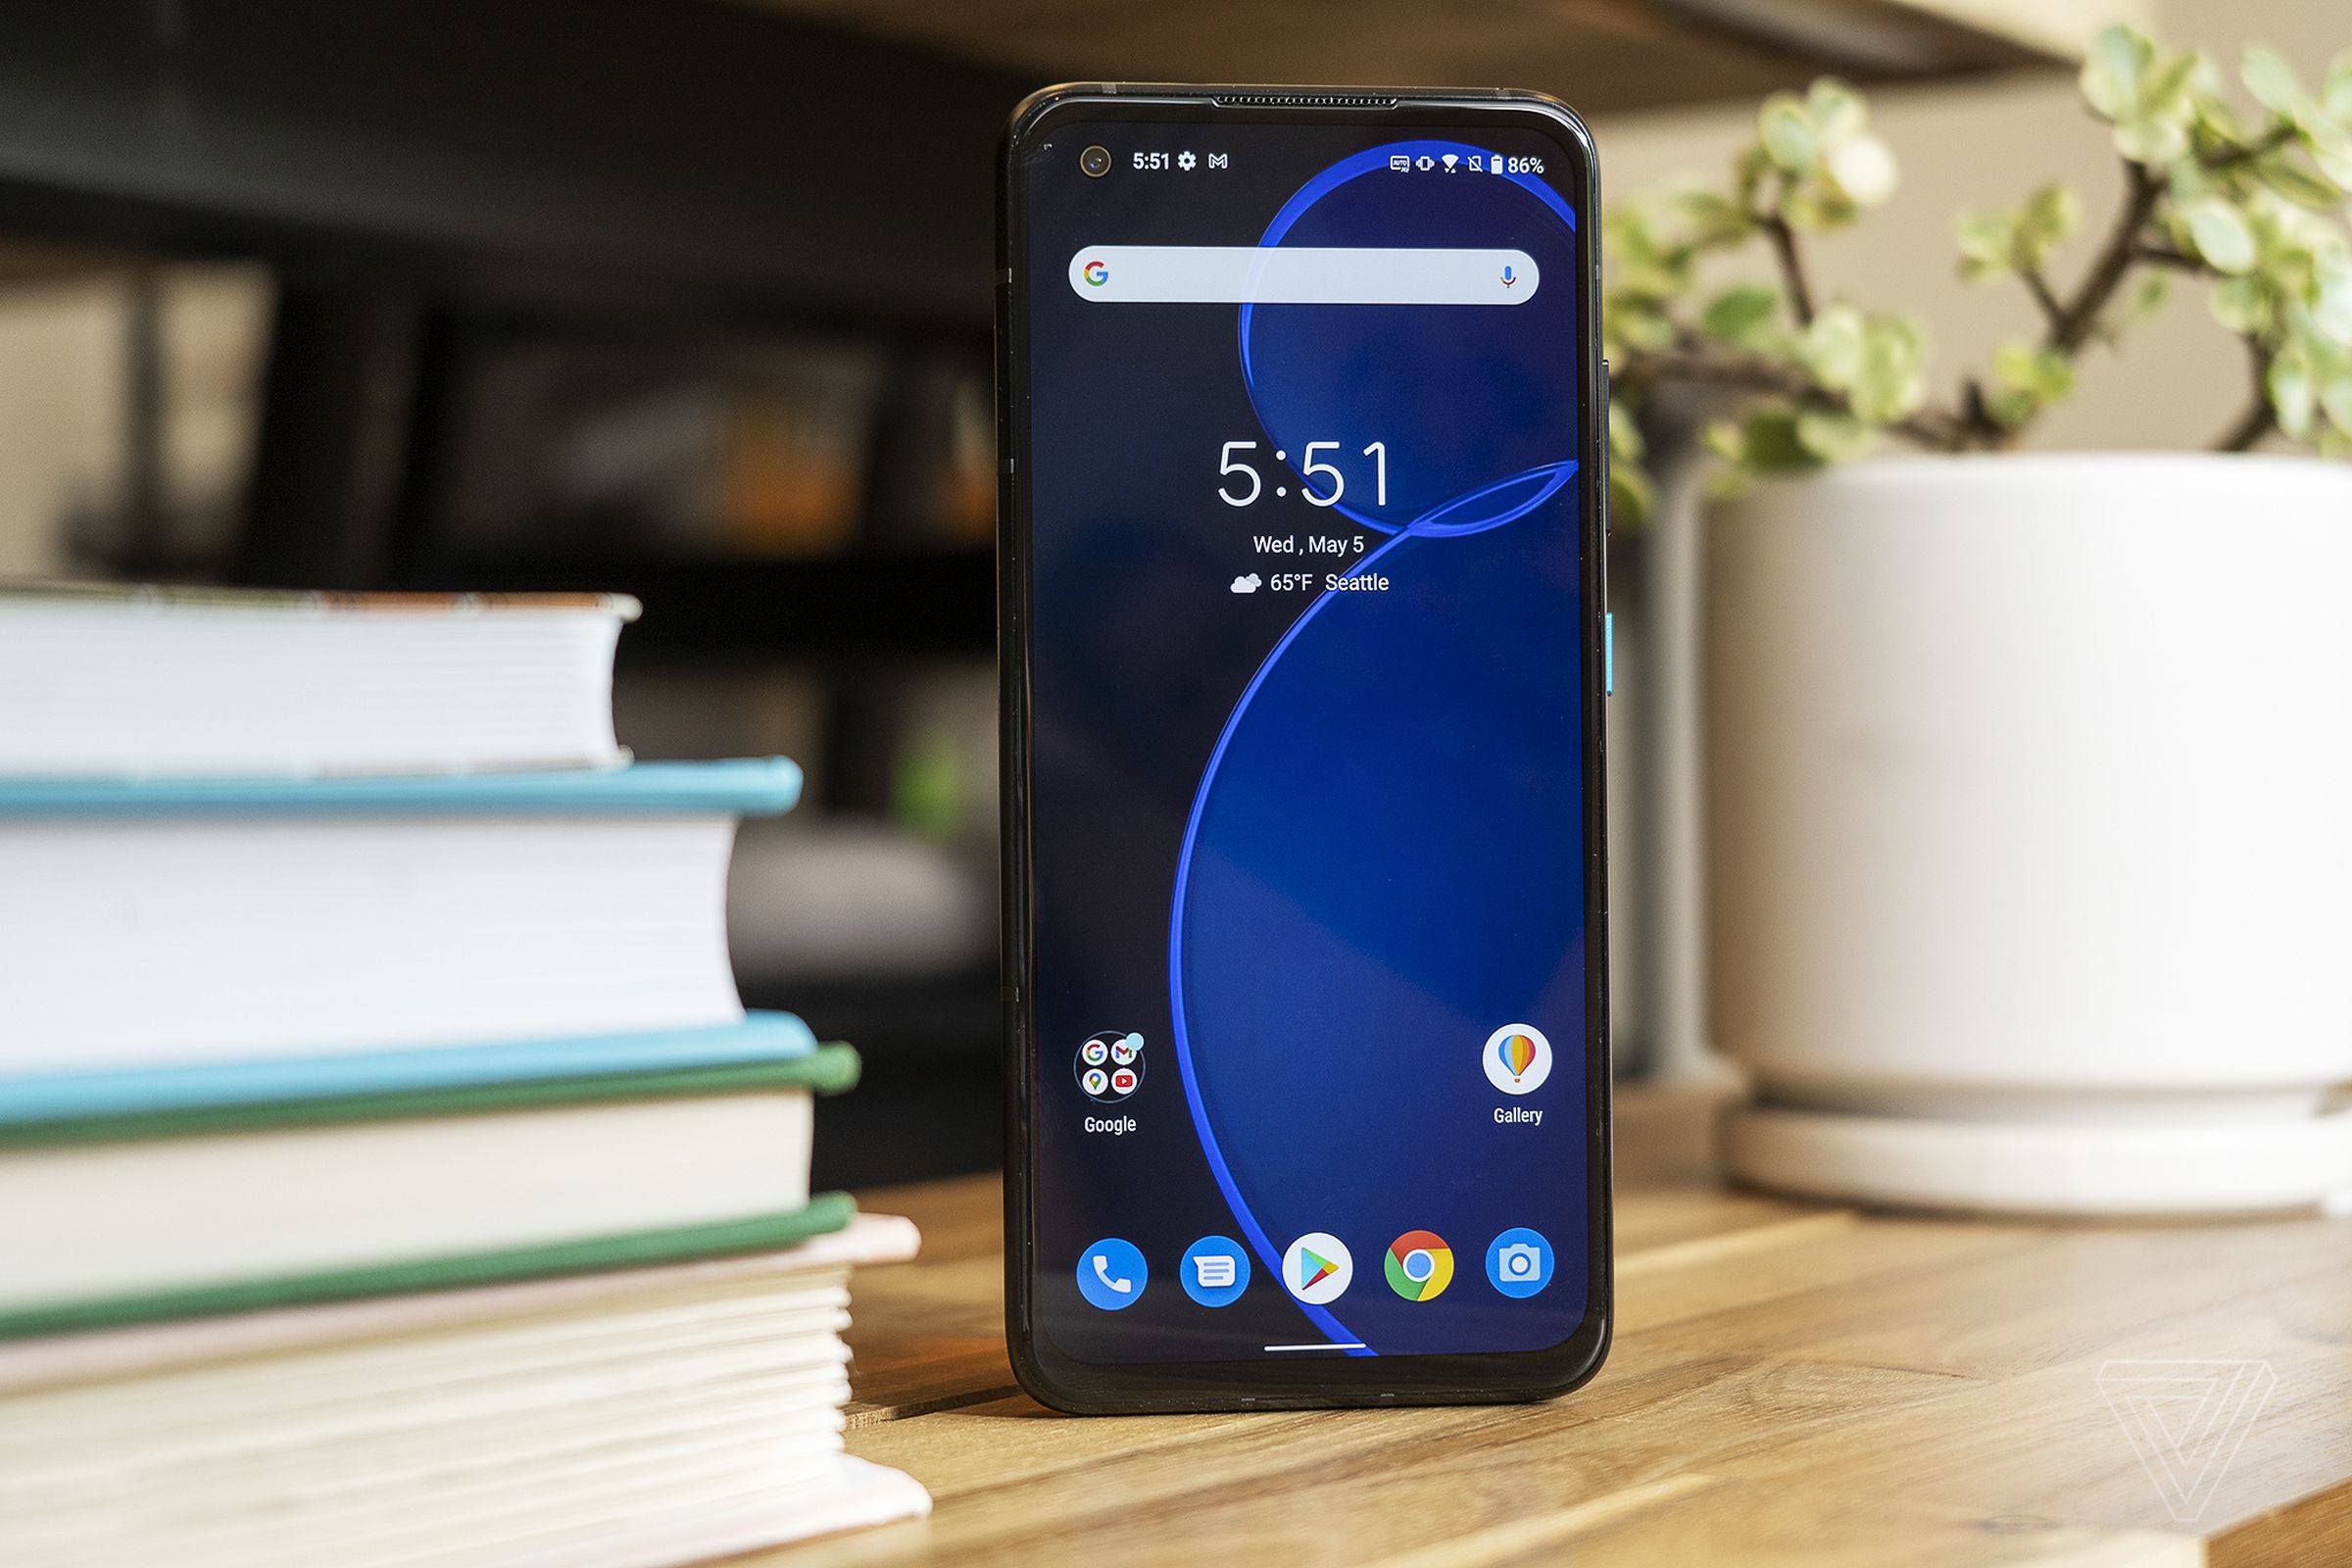 The ZenFone 8 doesn’t sacrifice a flagship experience to achieve its small form factor.